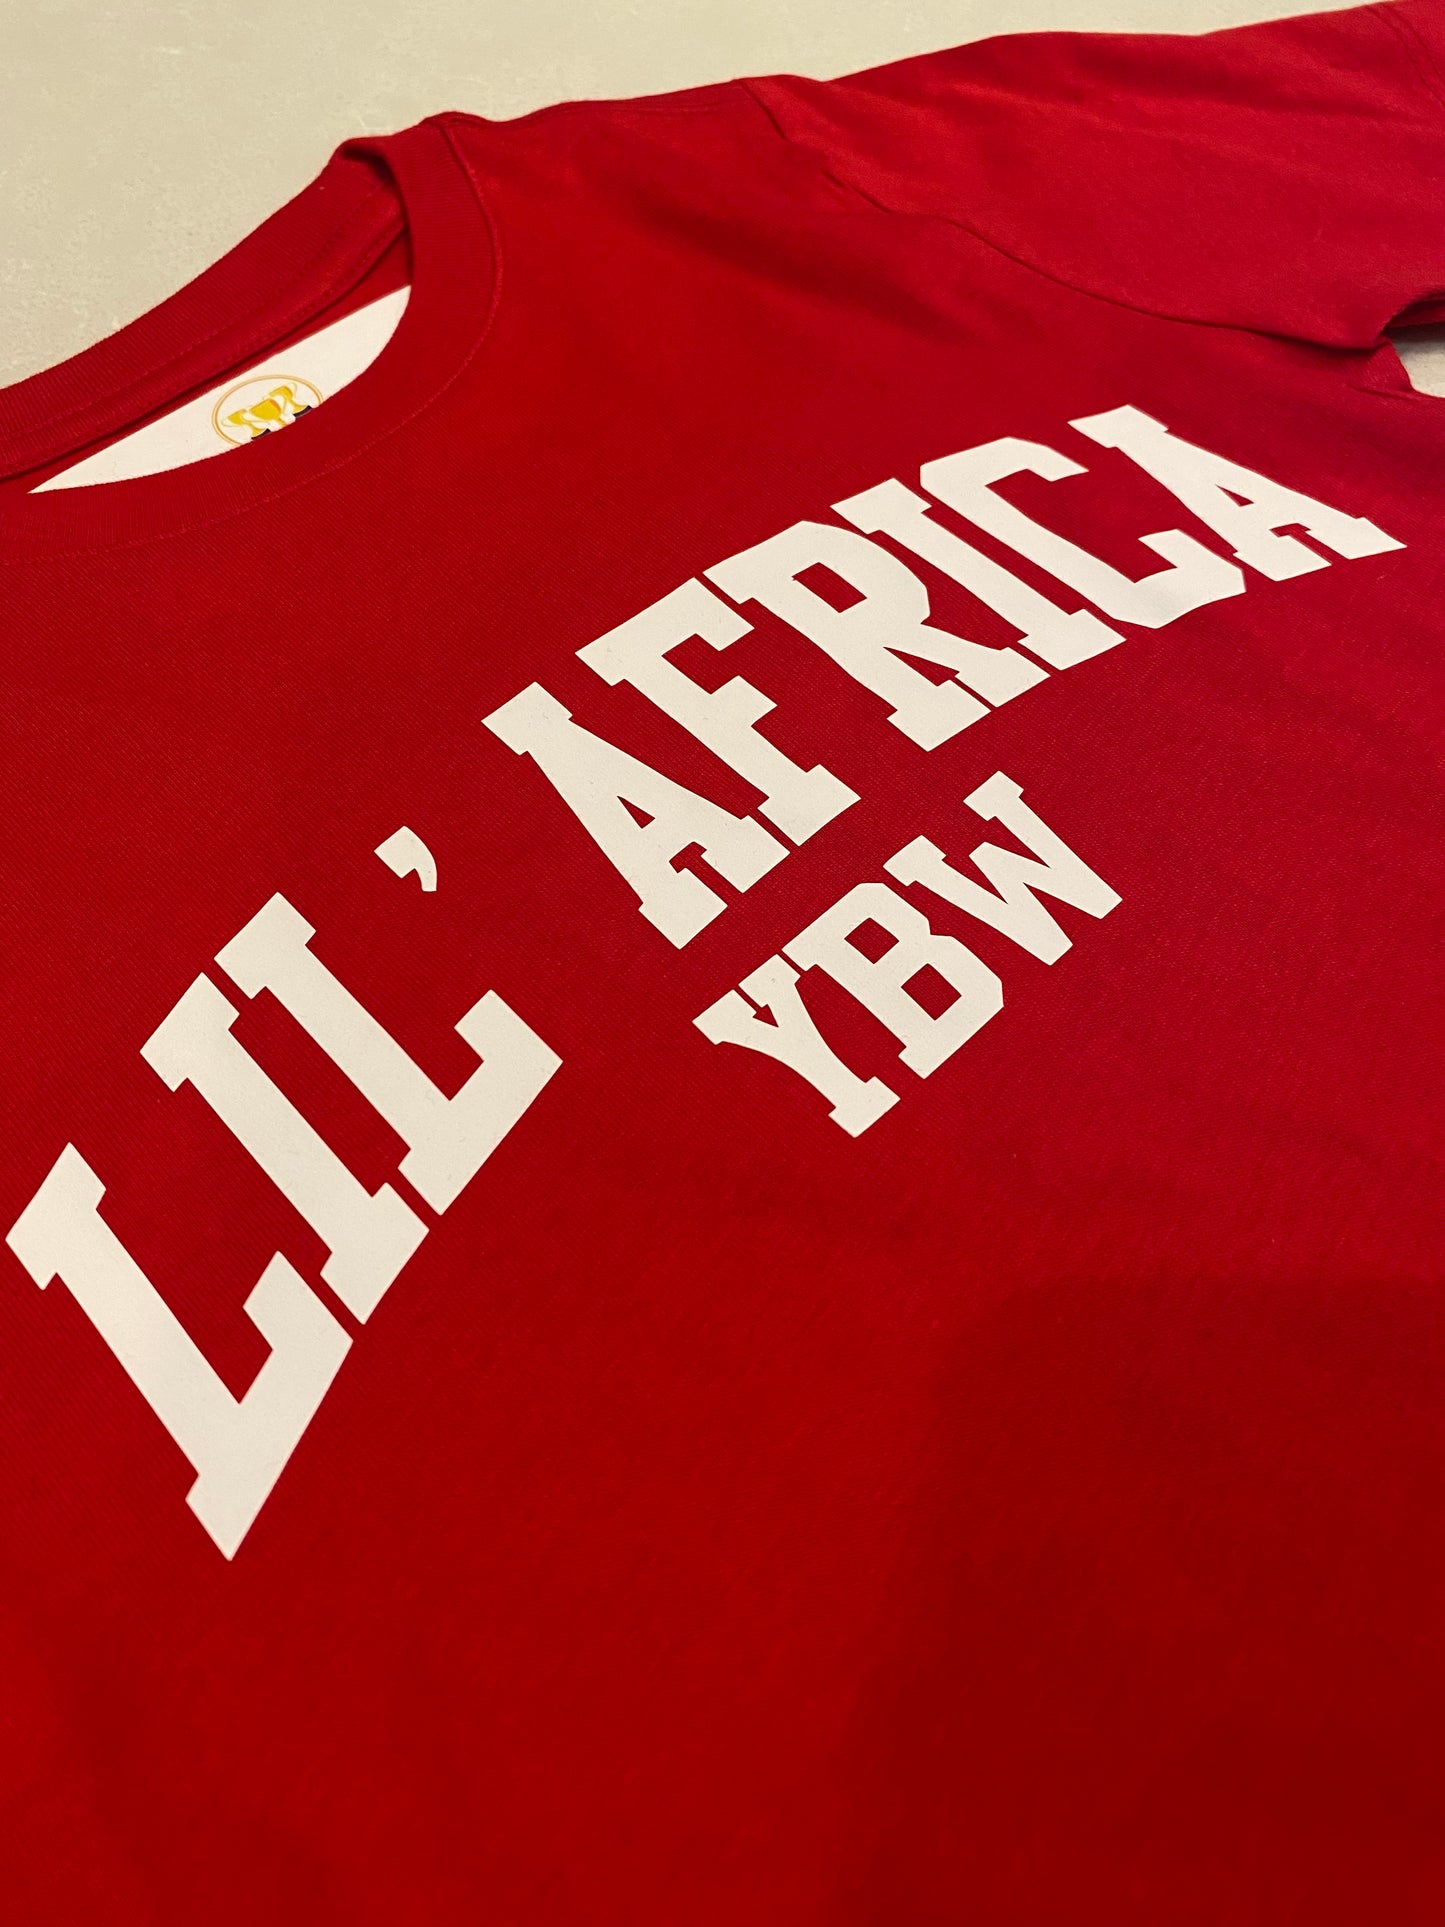 YBW Lil’ Africa T- Youth